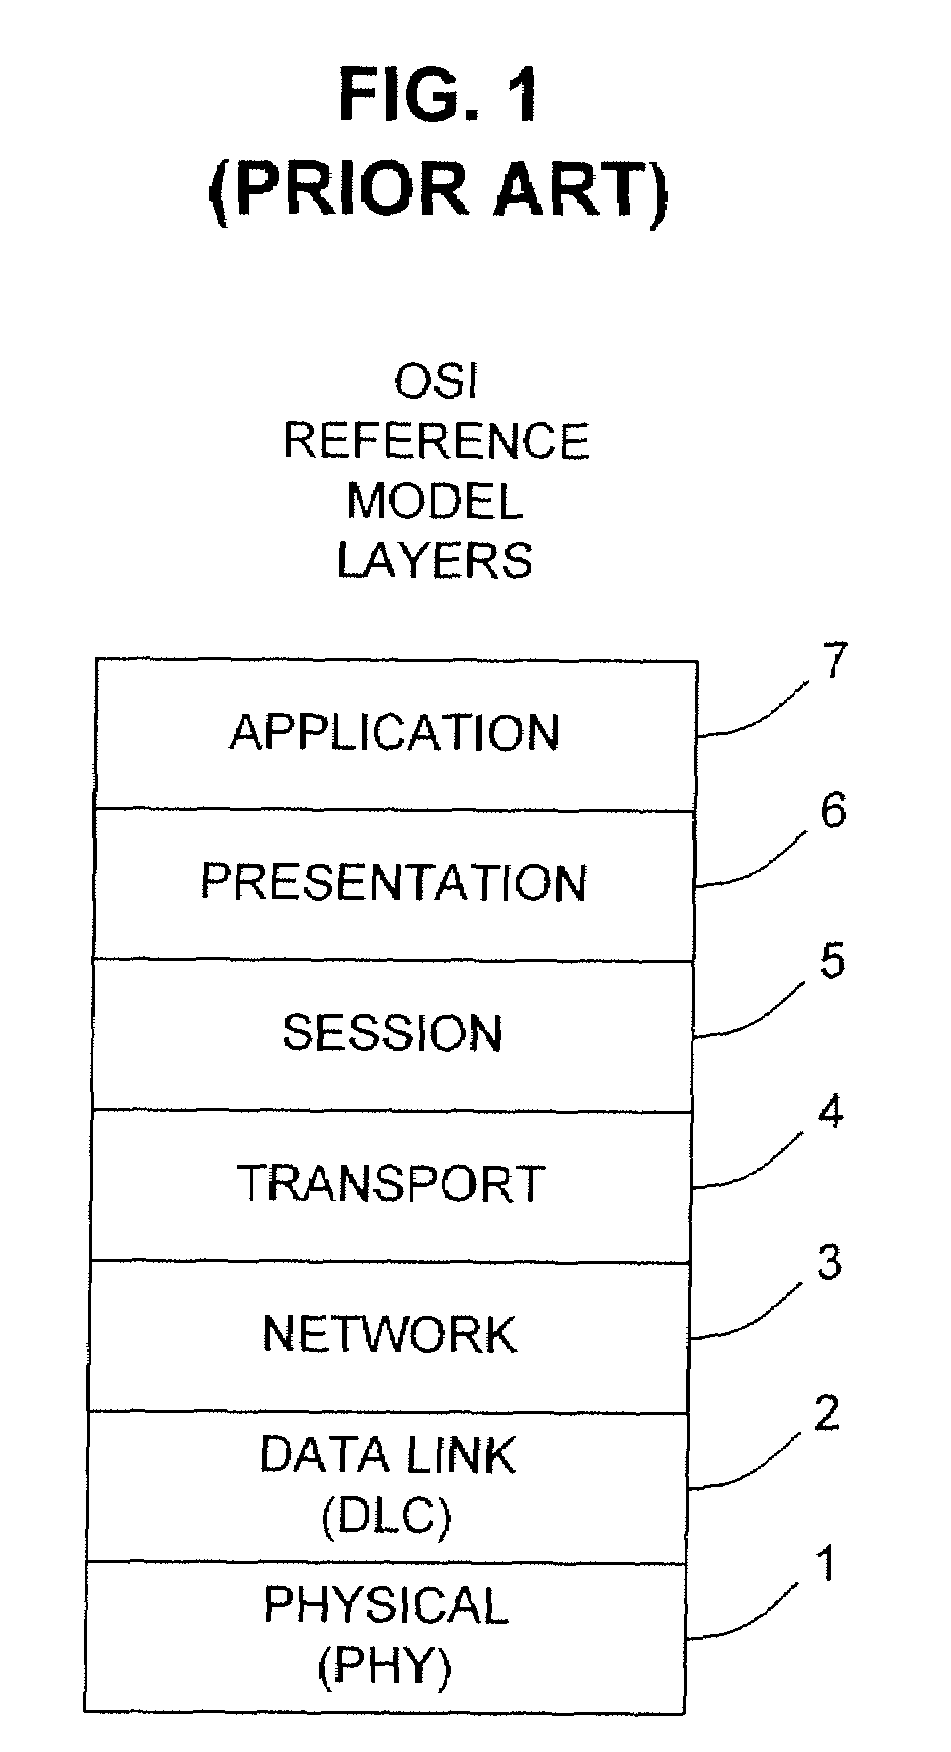 Operations, administration and maintenance (OAM) systems and methods for packet switched data networks